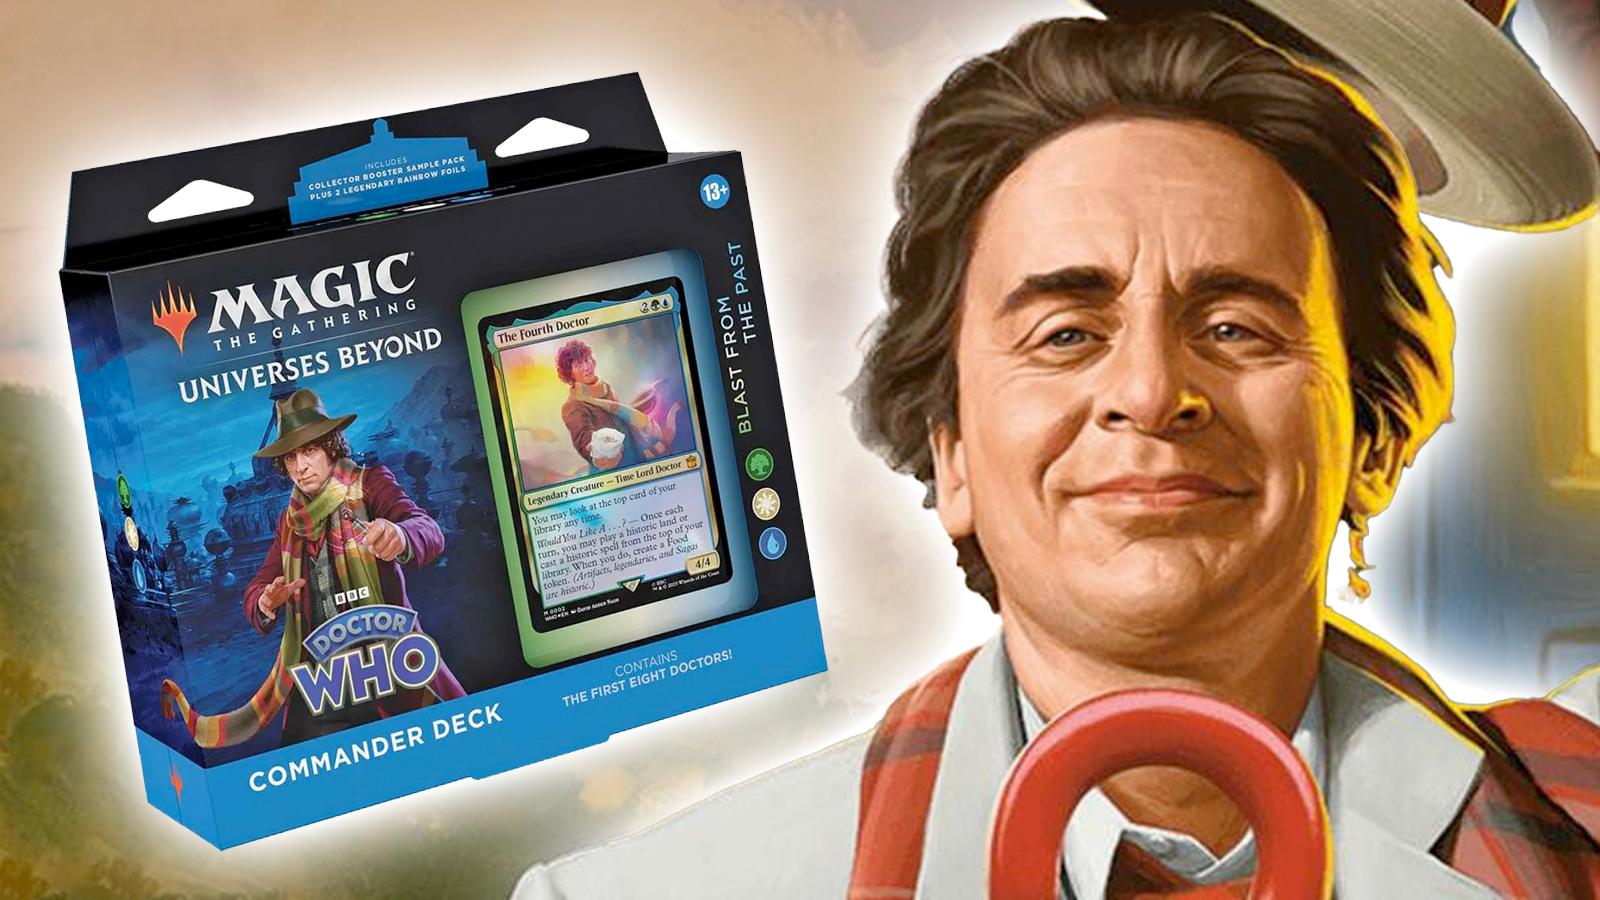 Seventh Doctor from Doctor Who next ot the MTG deck